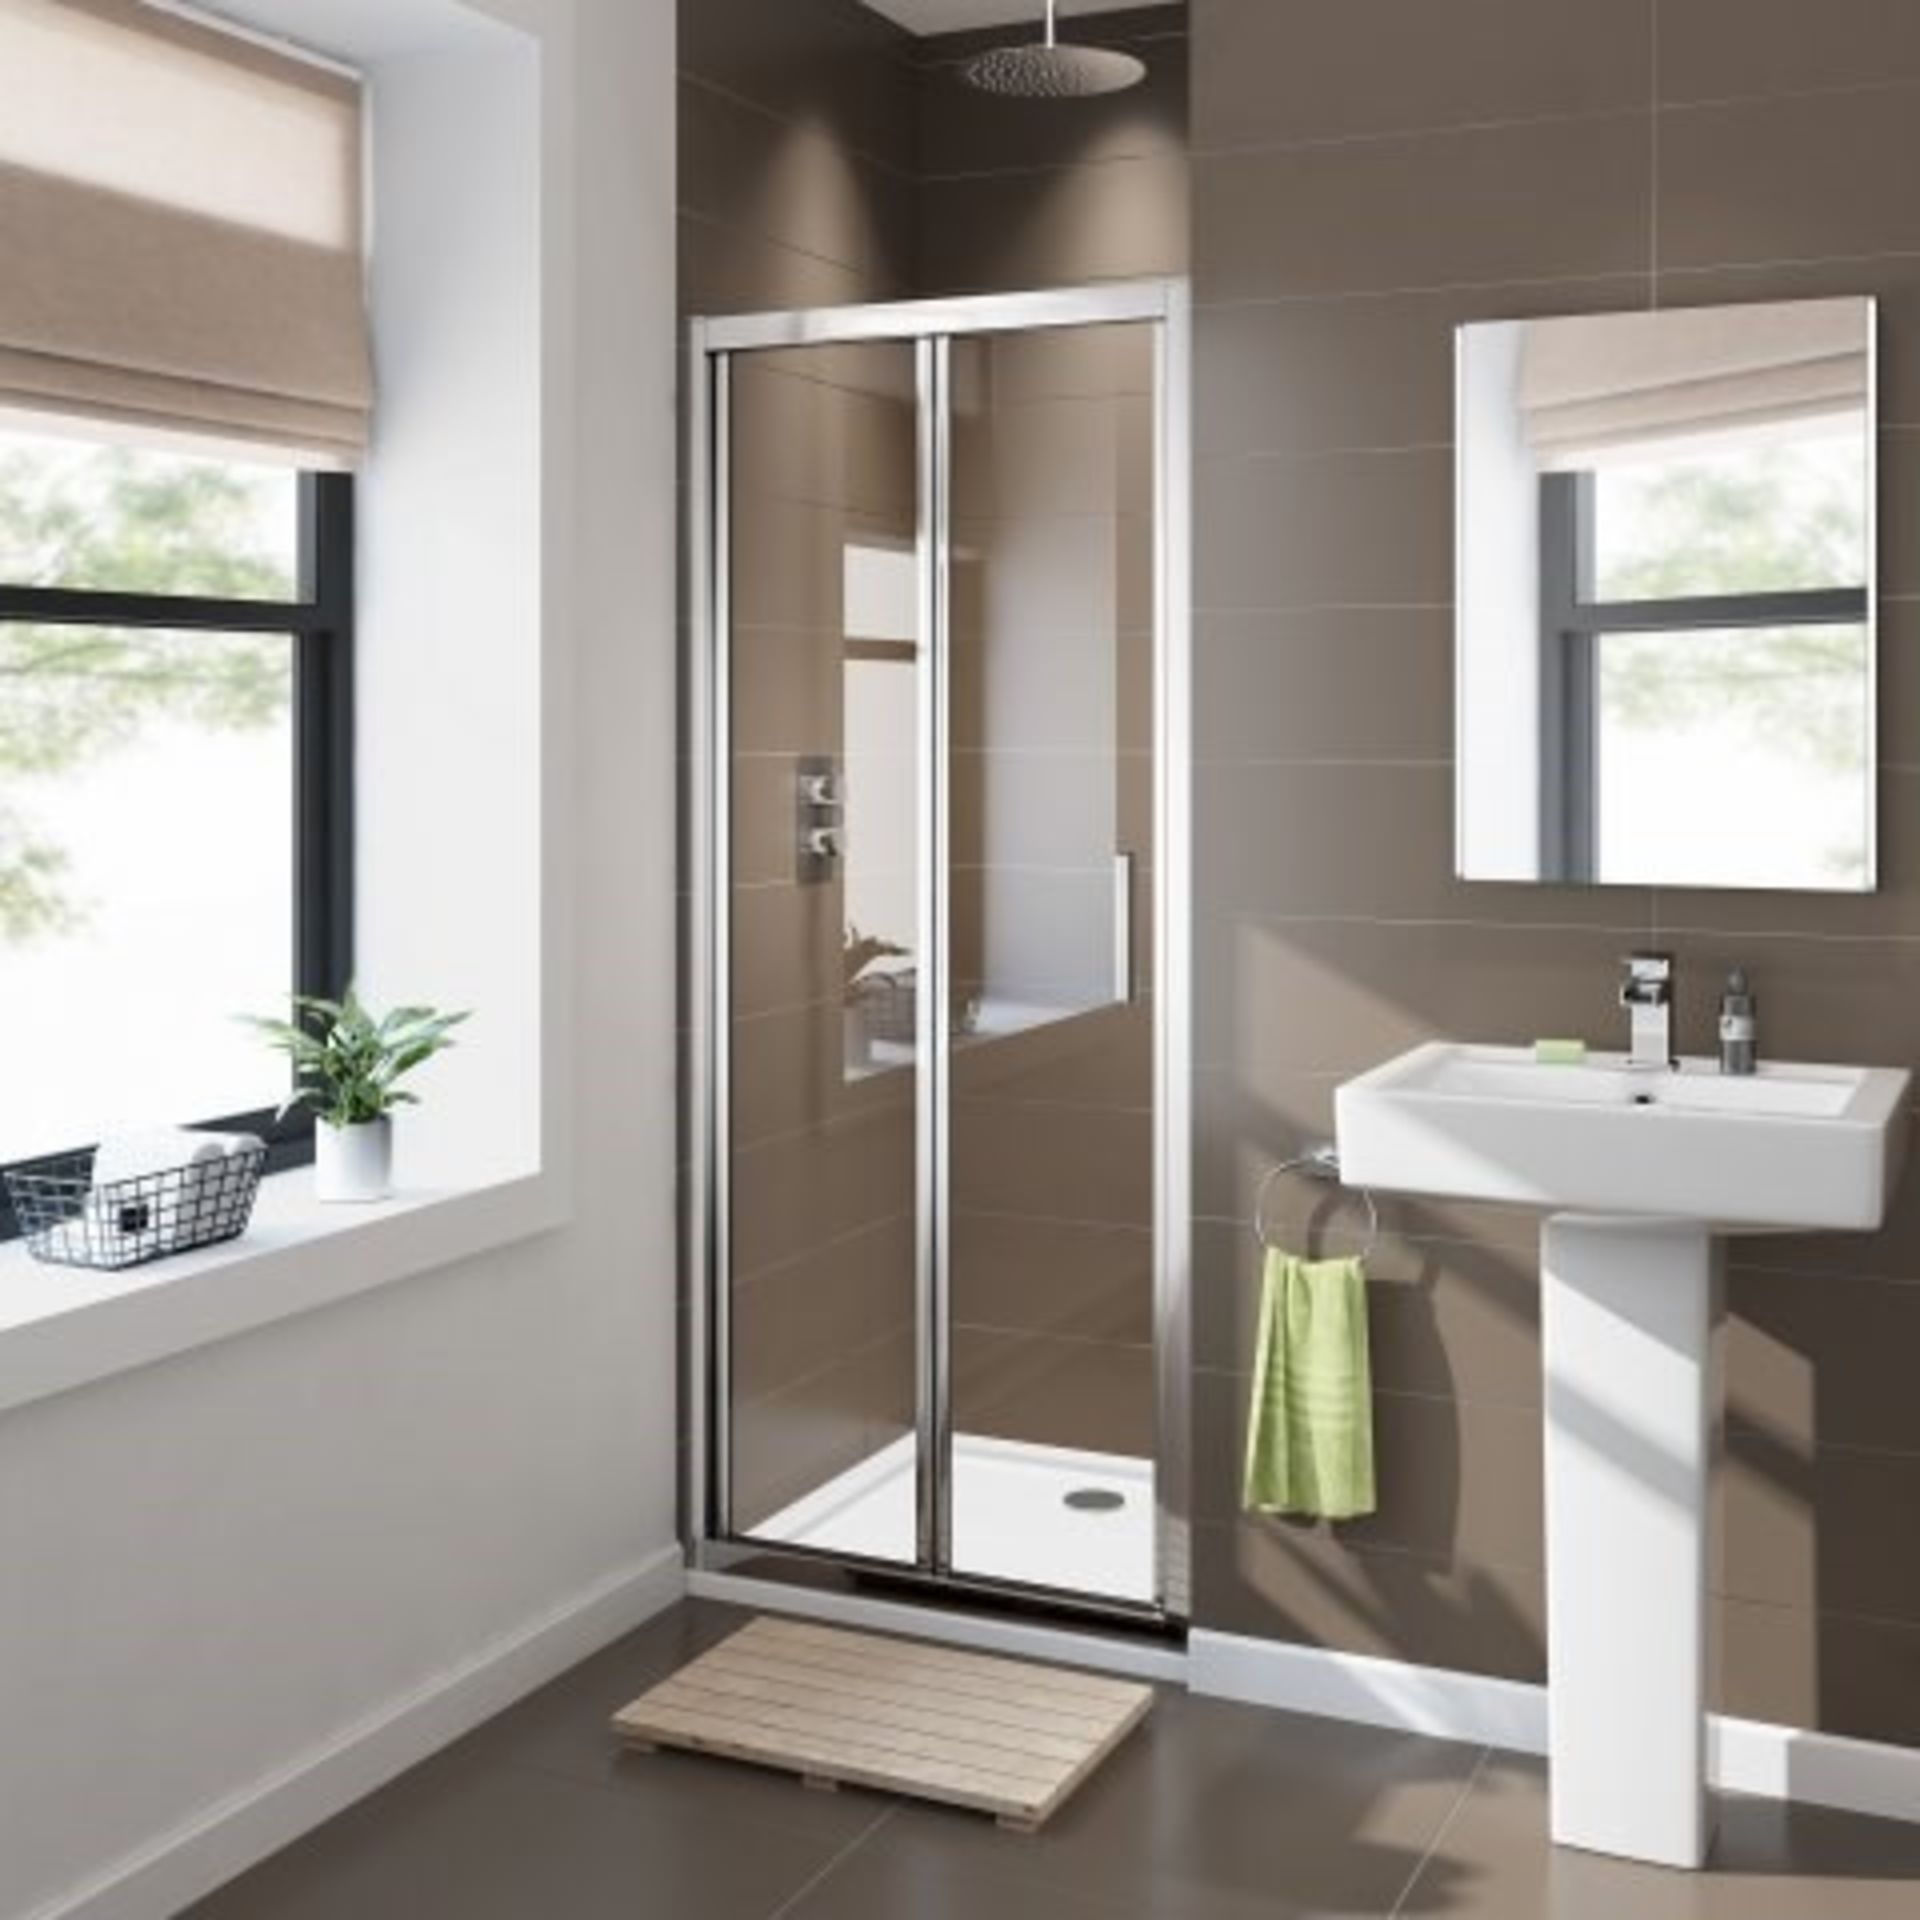 Twyfords 760mm - 8mm - Premium EasyClean Bifold Shower Door. RRP £379.99.Durability to with... - Image 2 of 2